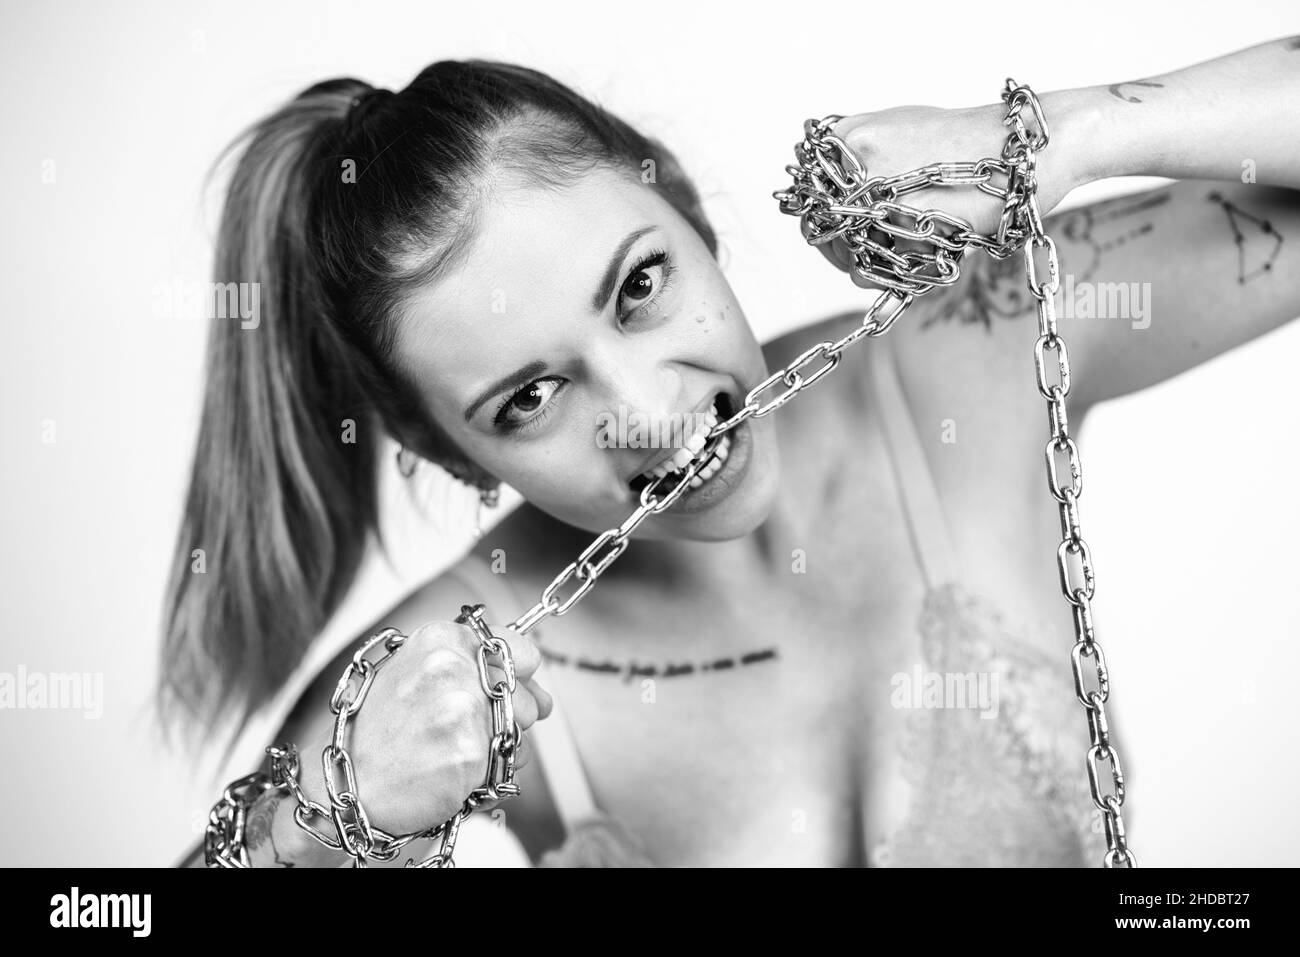 Tattooed woman in bra biting and tearing a iron chain on white background. Girl power concept. Black and white photo. Stock Photo